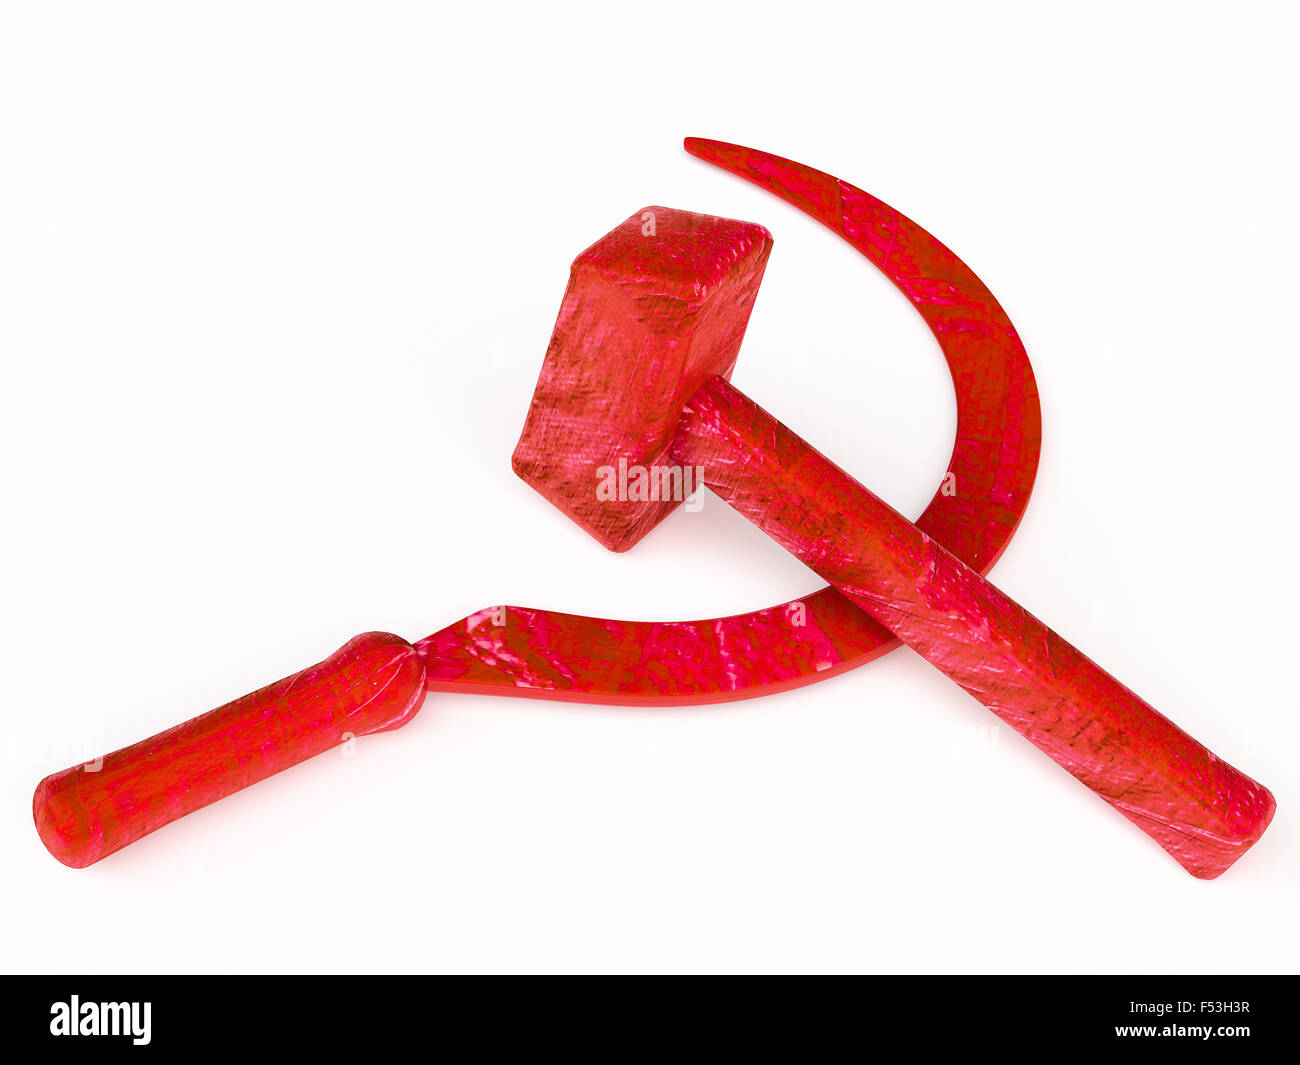 hammer  industrial labourers and sickle for peasantry; combined  stood for worker-peasant alliance for socialism and against rea Stock Photo